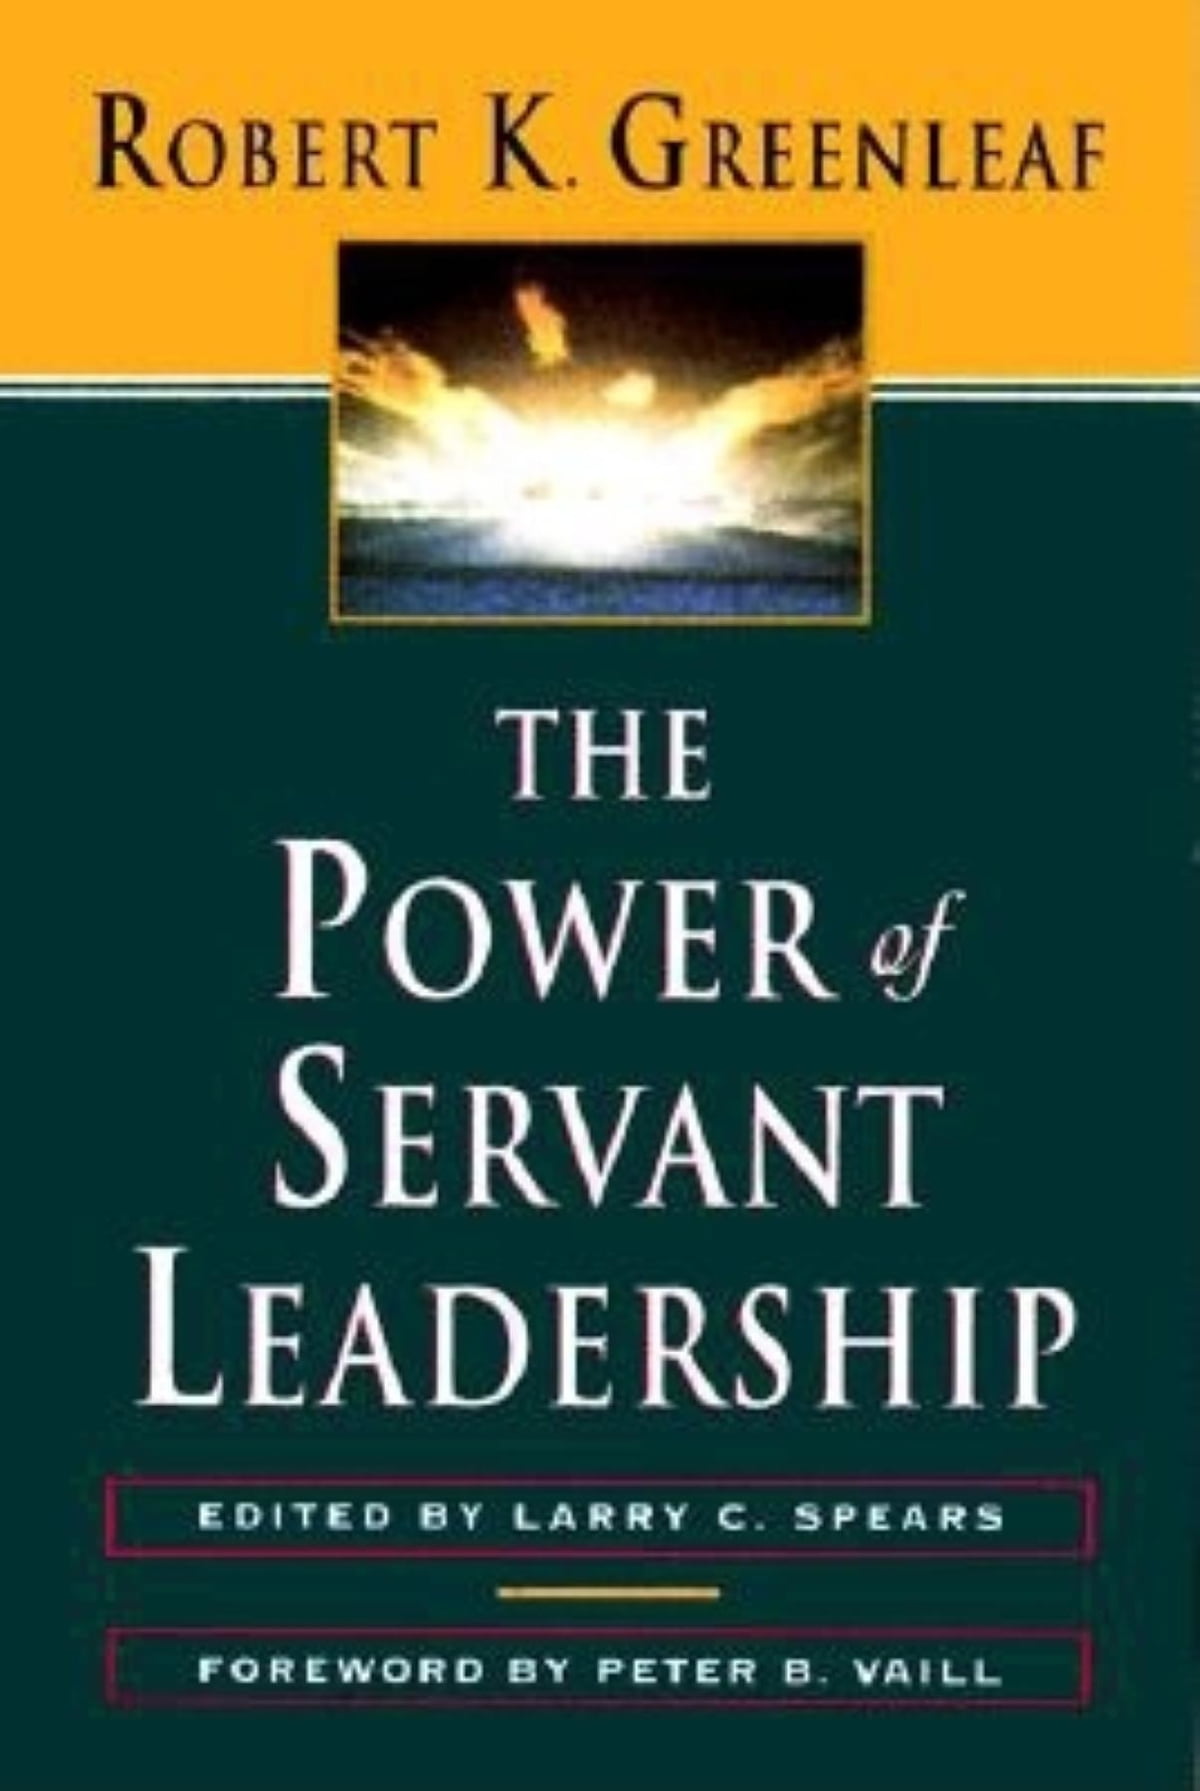 books about servant leadership8